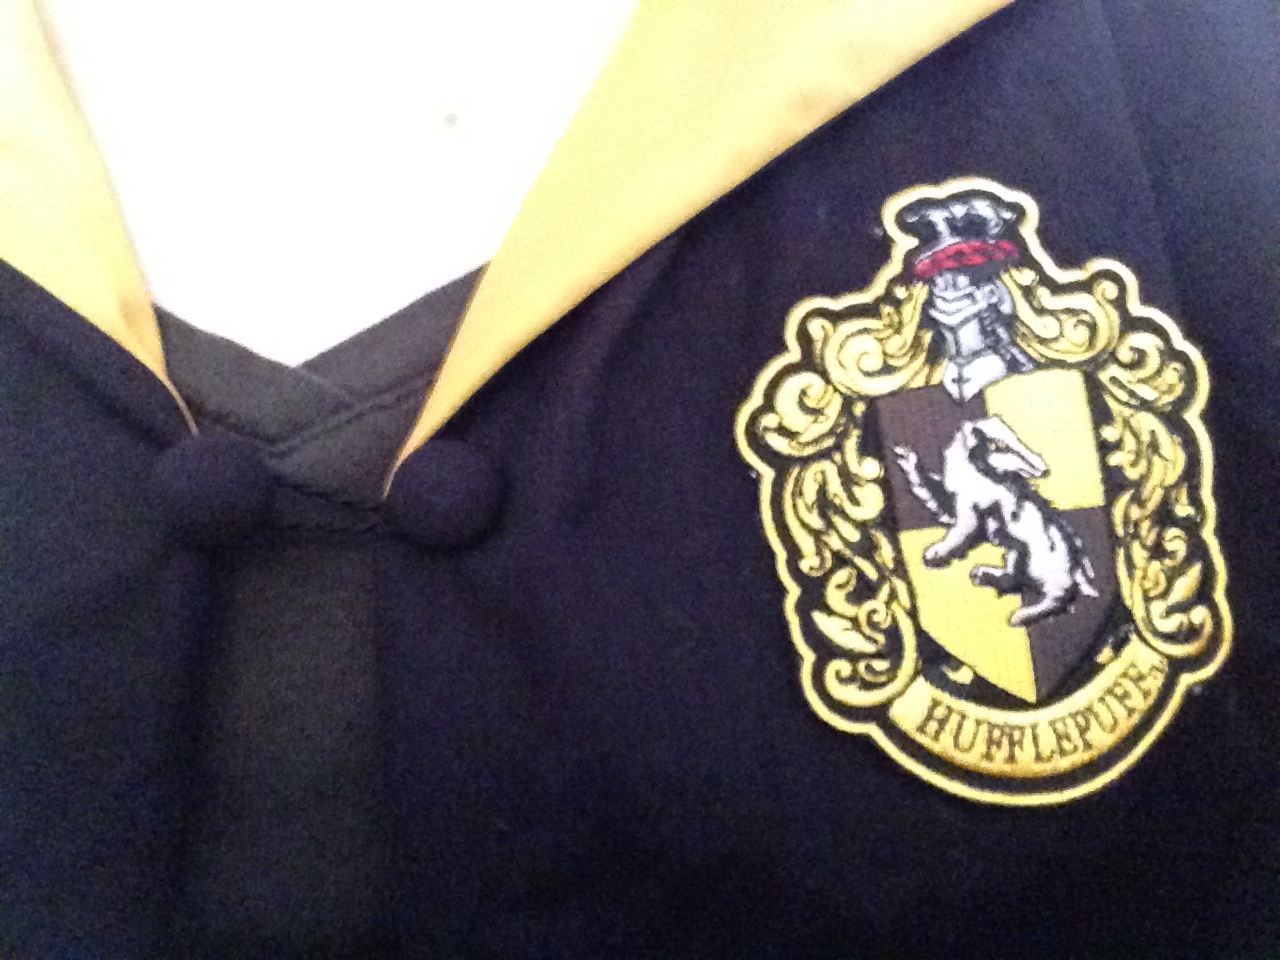 Buttons and Crest in place